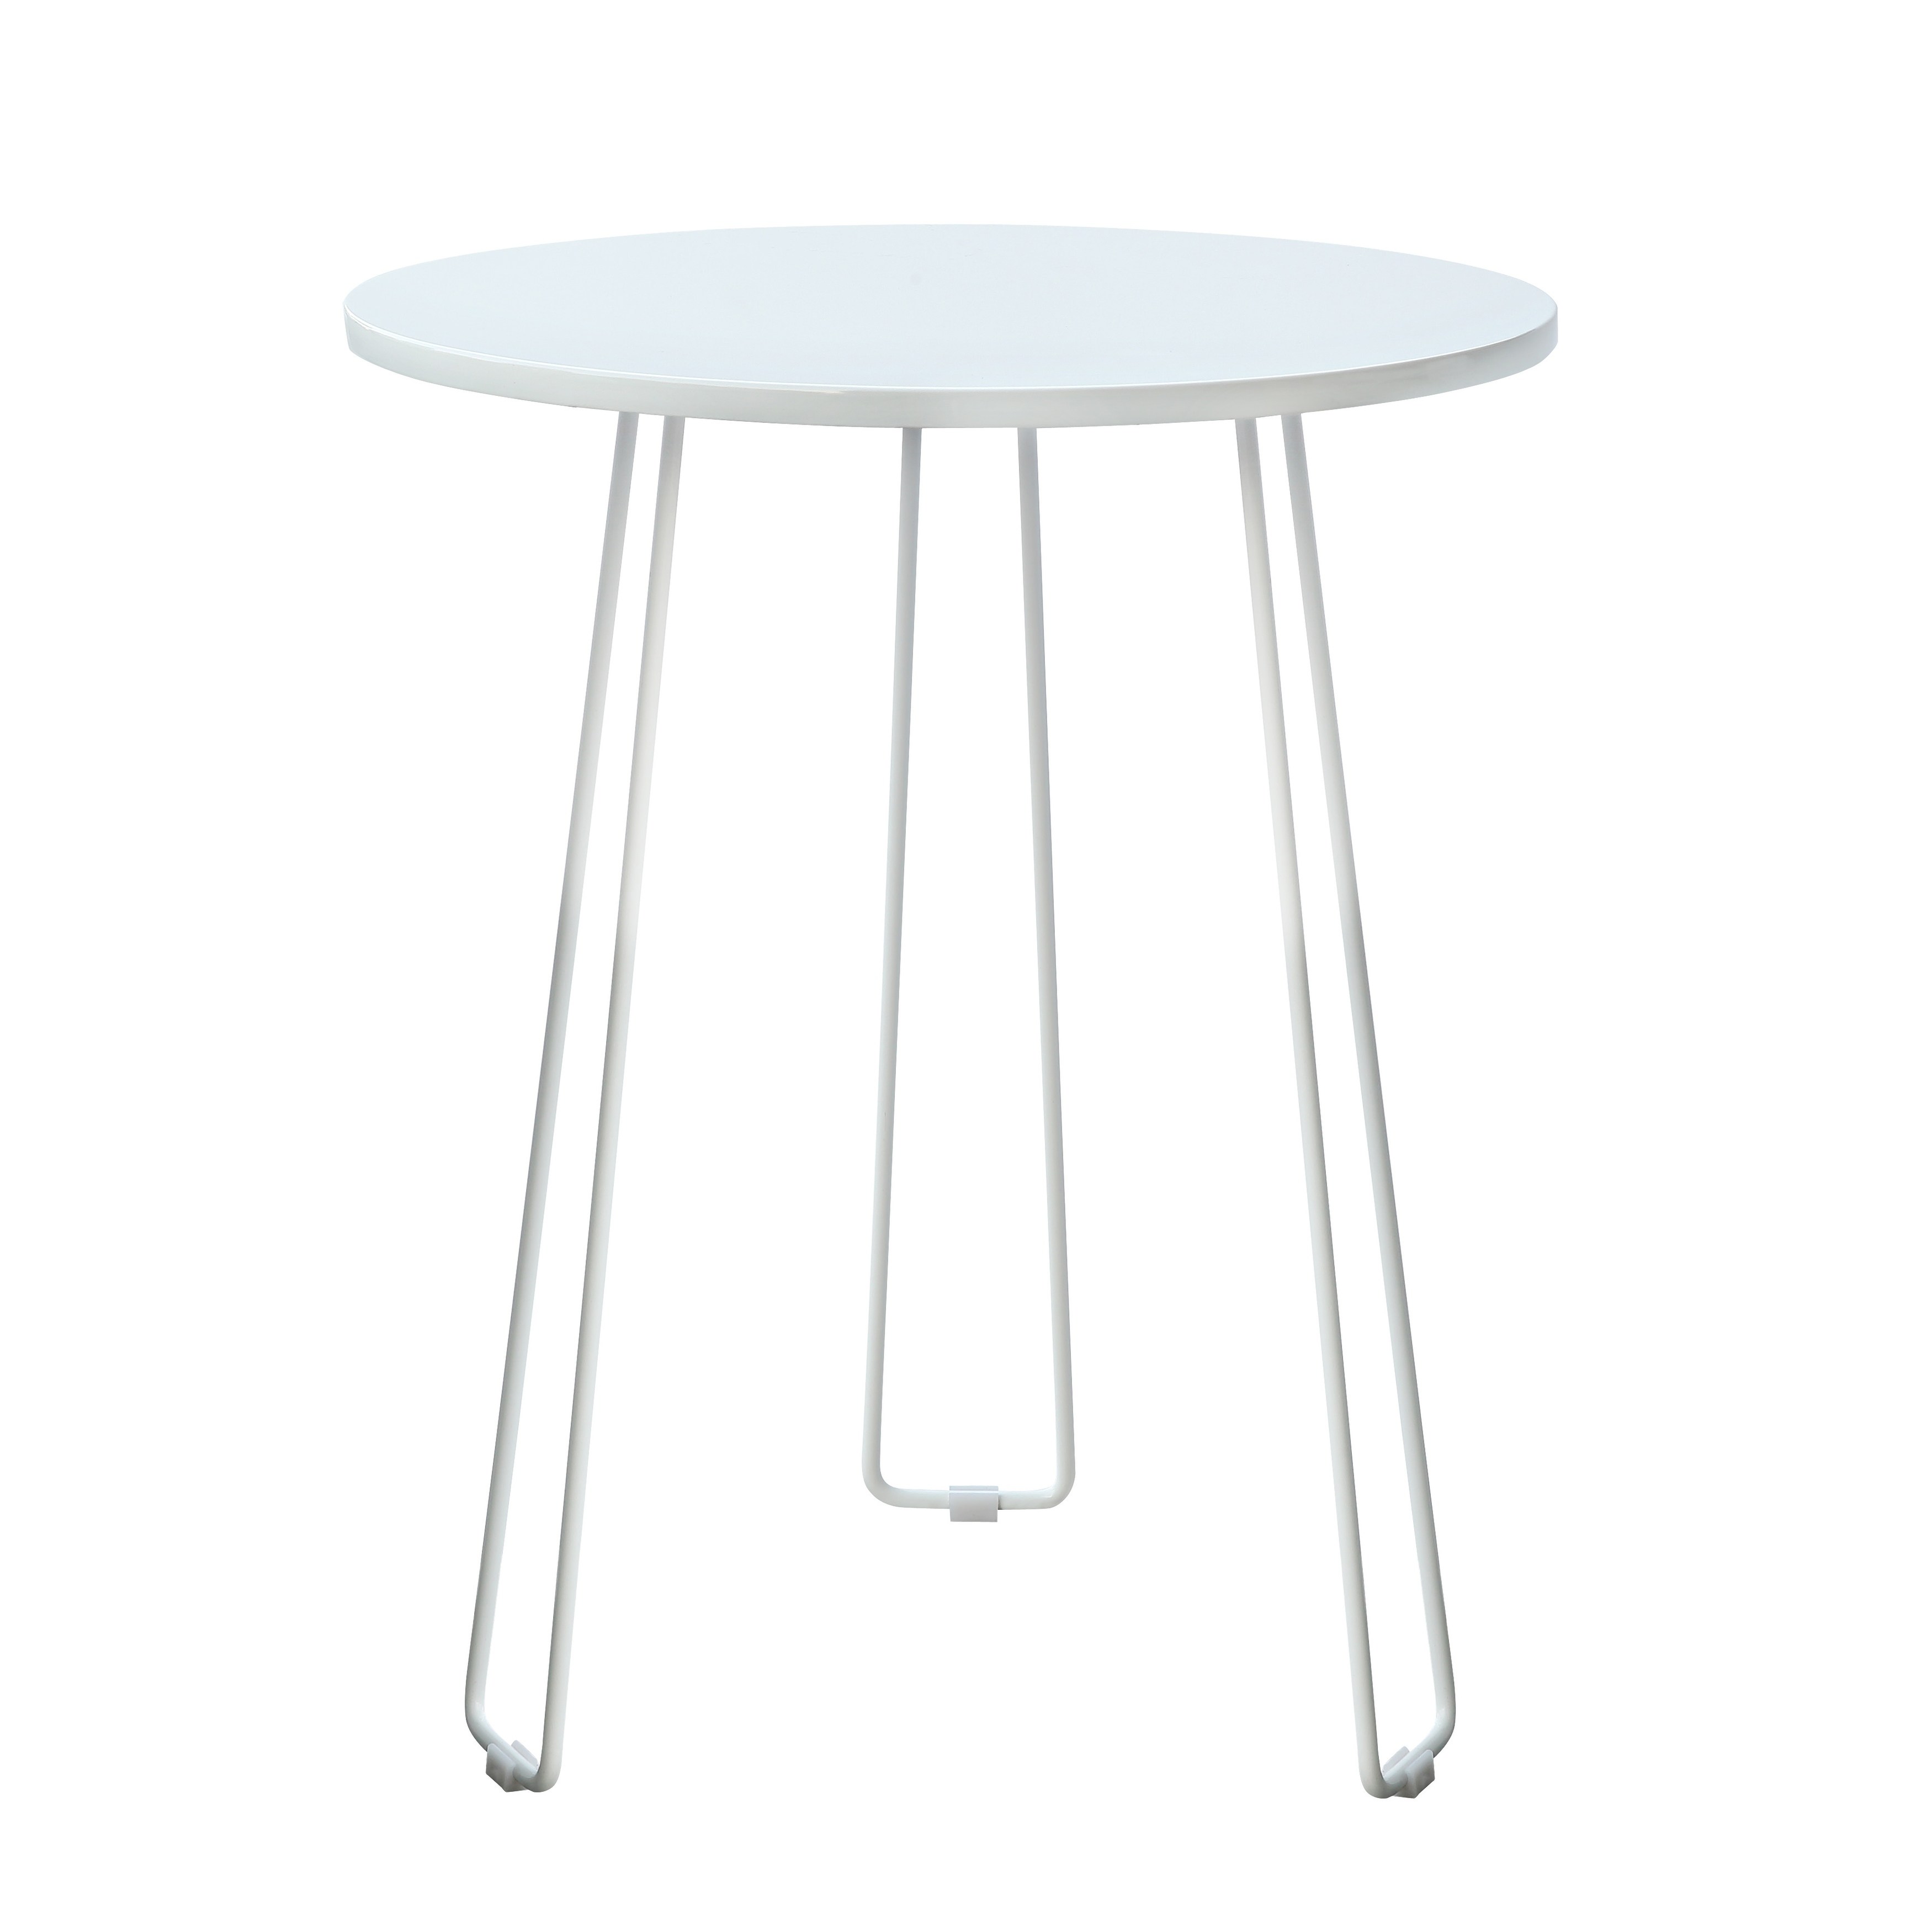 poly and bark coffette hairpin end table white free room essentials accent shipping today round dining west elm mallard lamp coffee sets clearance pine legs folding garden side